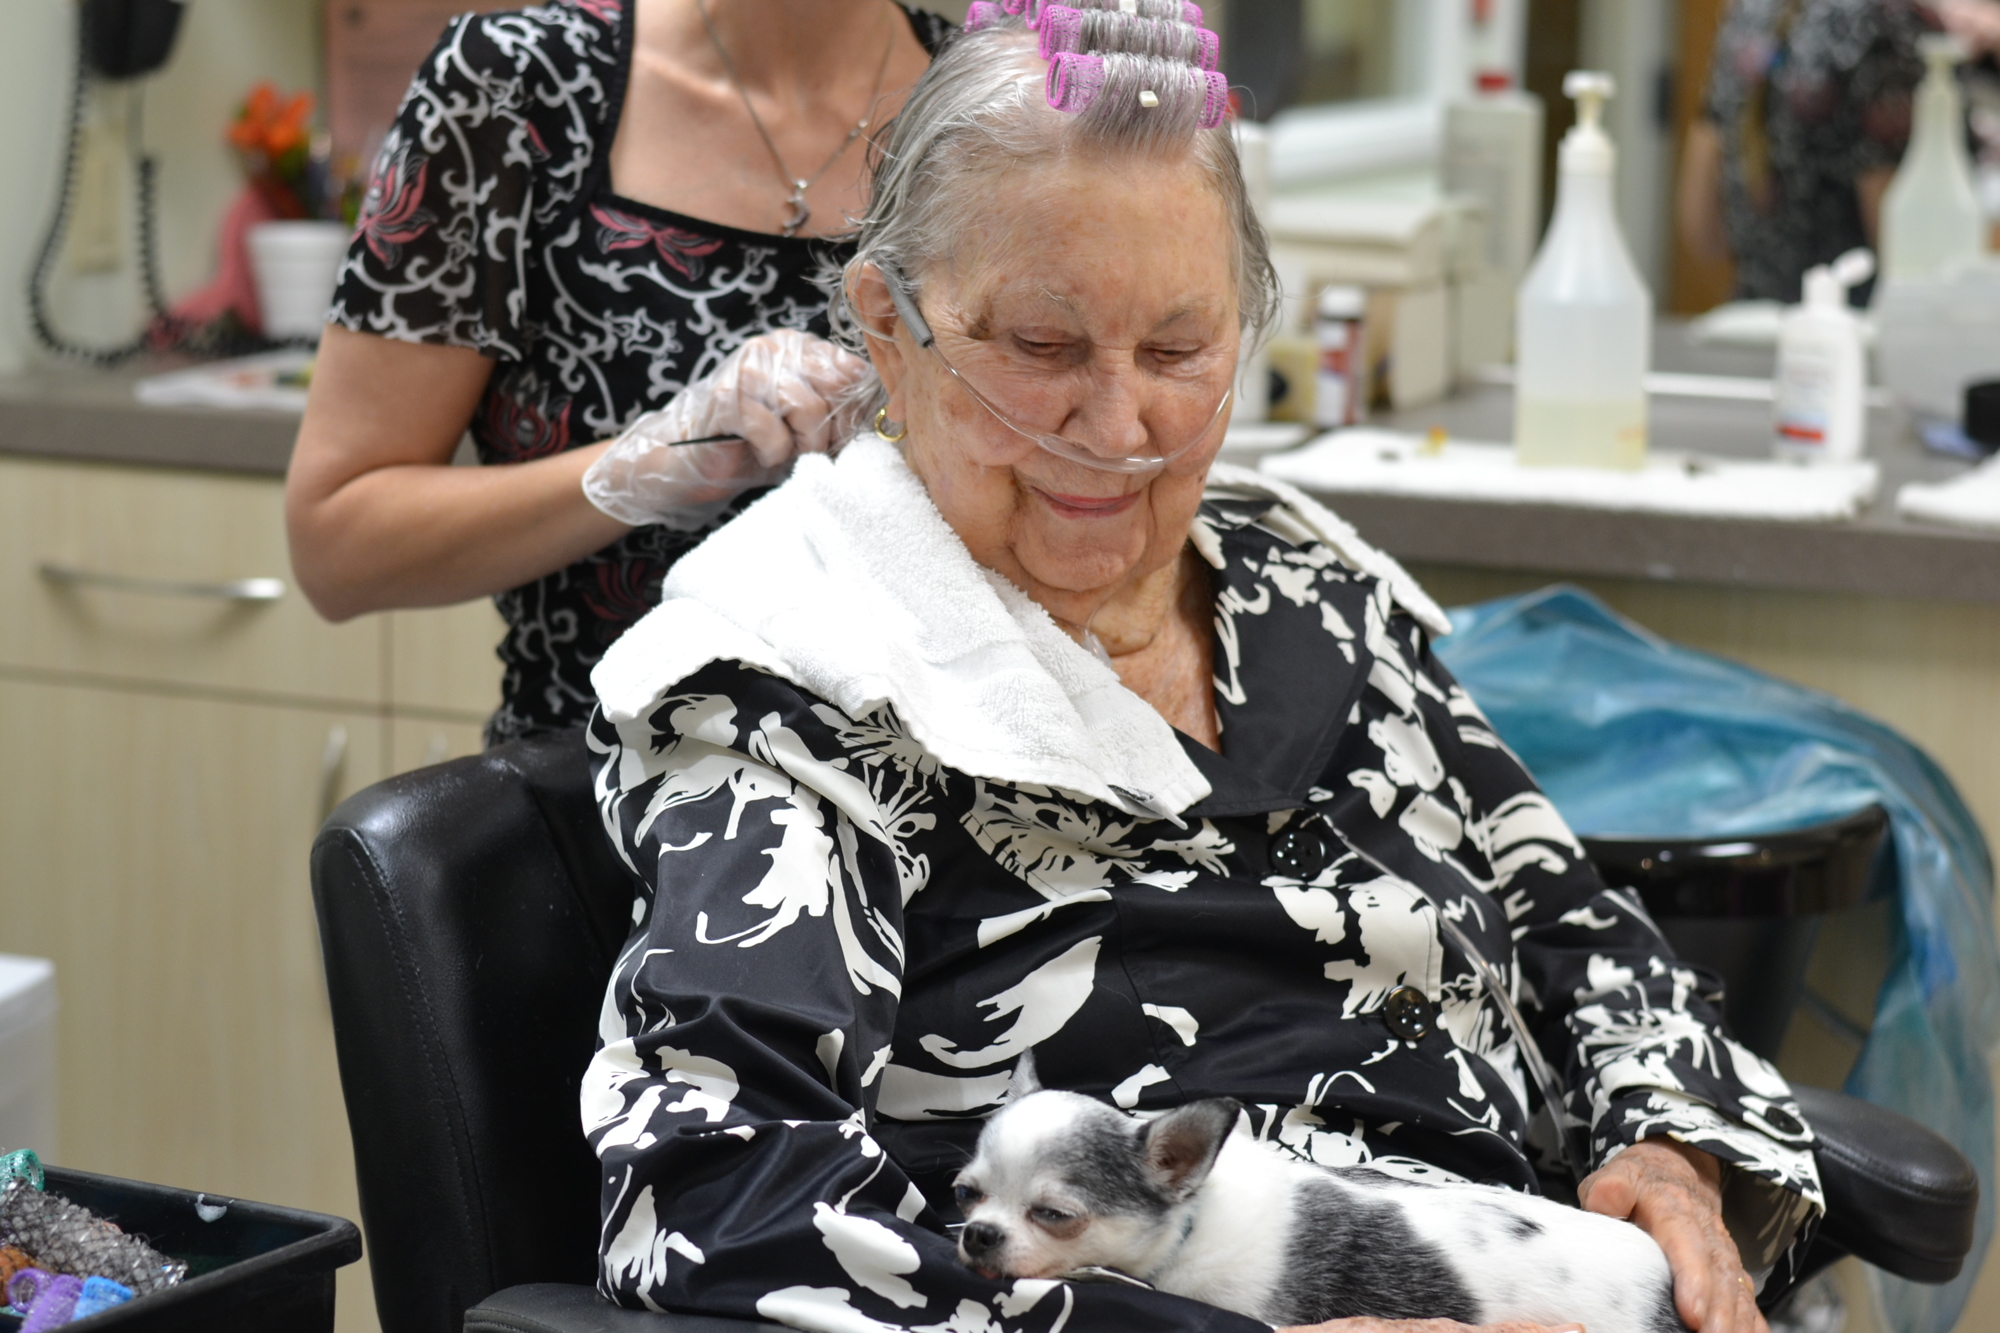 Resident Dr. Mary Elemndorf has curlers set in her hair while her dog Freddy snoozes on her lap.